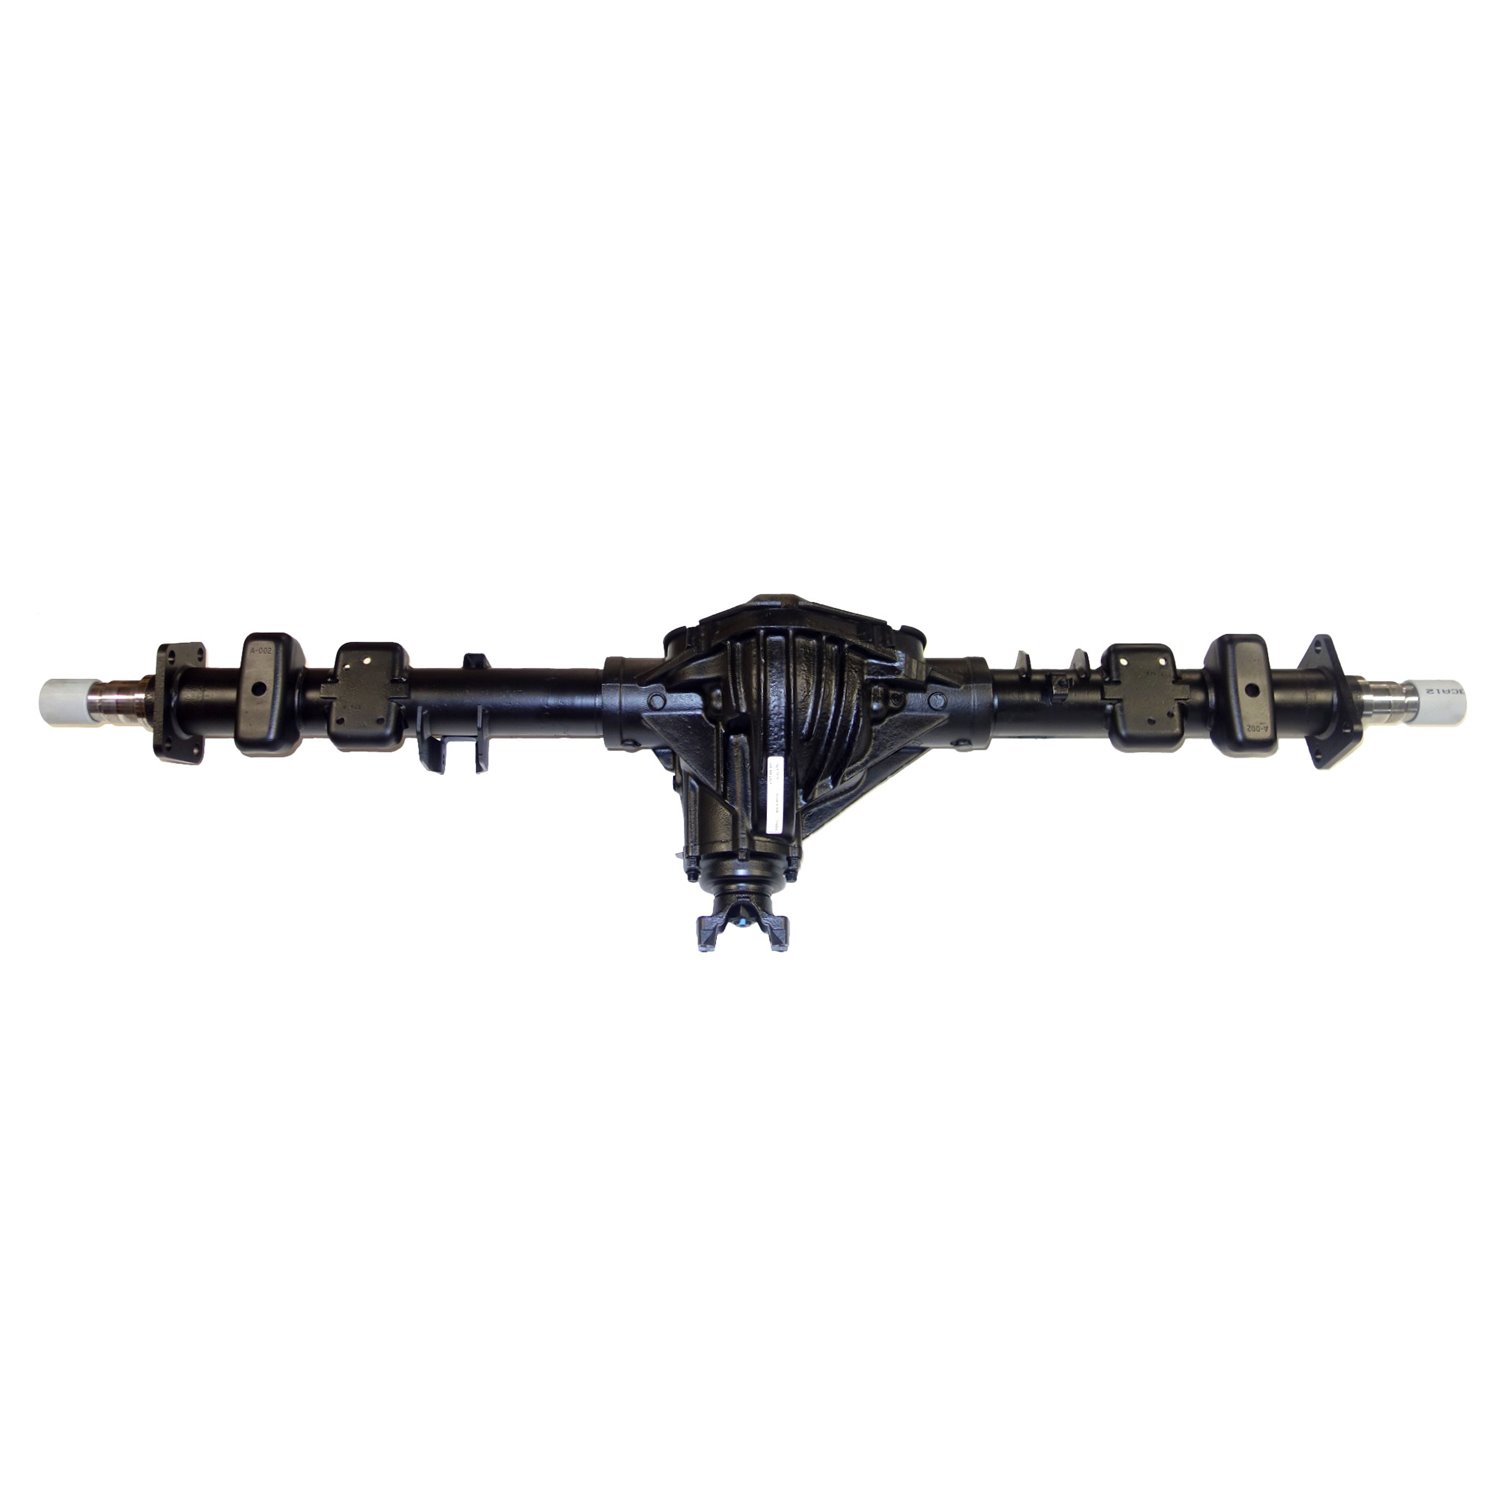 Remanufactured Axle Assy for GM 14 Bolt Truck 90-00 GM 3500, 3.73 , DRW, Wide Track